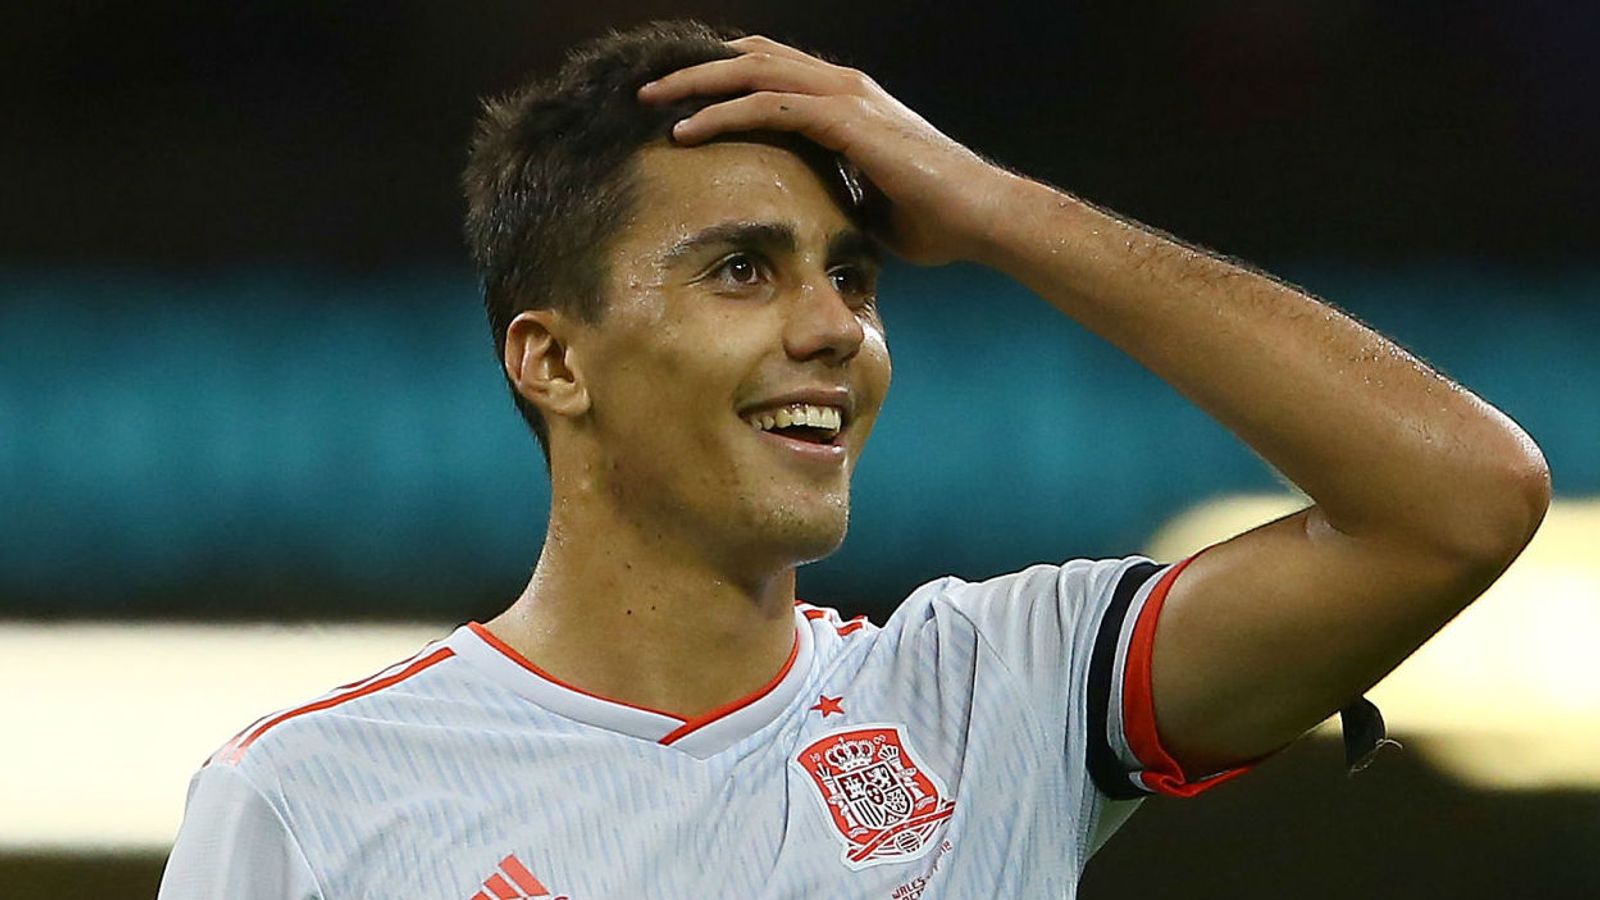  Rodri celebrates after scoring a goal for Spain during a football match.